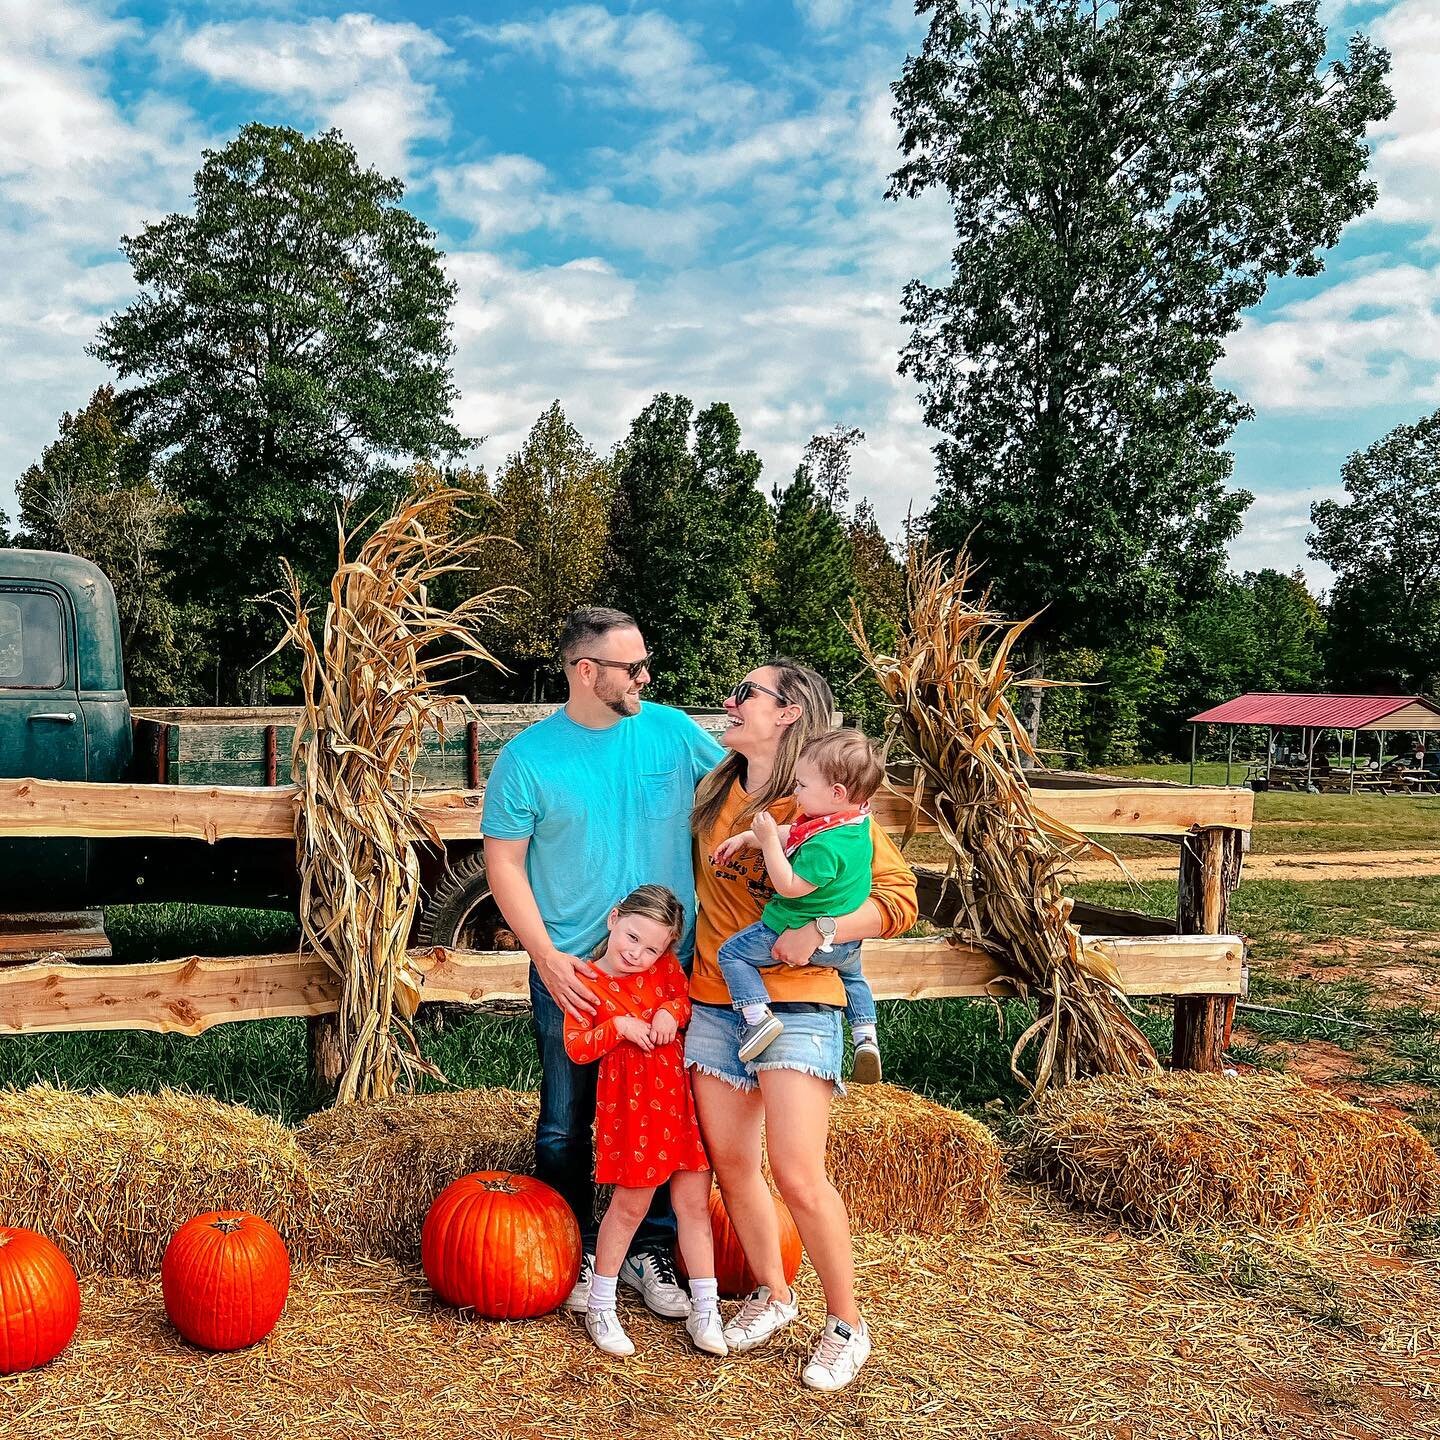 Happy 7 years to you @el_jefe_flan ! I&rsquo;m so proud of us and this life we&rsquo;ve built.😍Love you.

Celebrated w our littles on the farm. Cider donuts were a HIT! 🎃🍁

#7yearsmarried #happyanniversary #jeff&amp;ang #stellarose #jackjames #pum